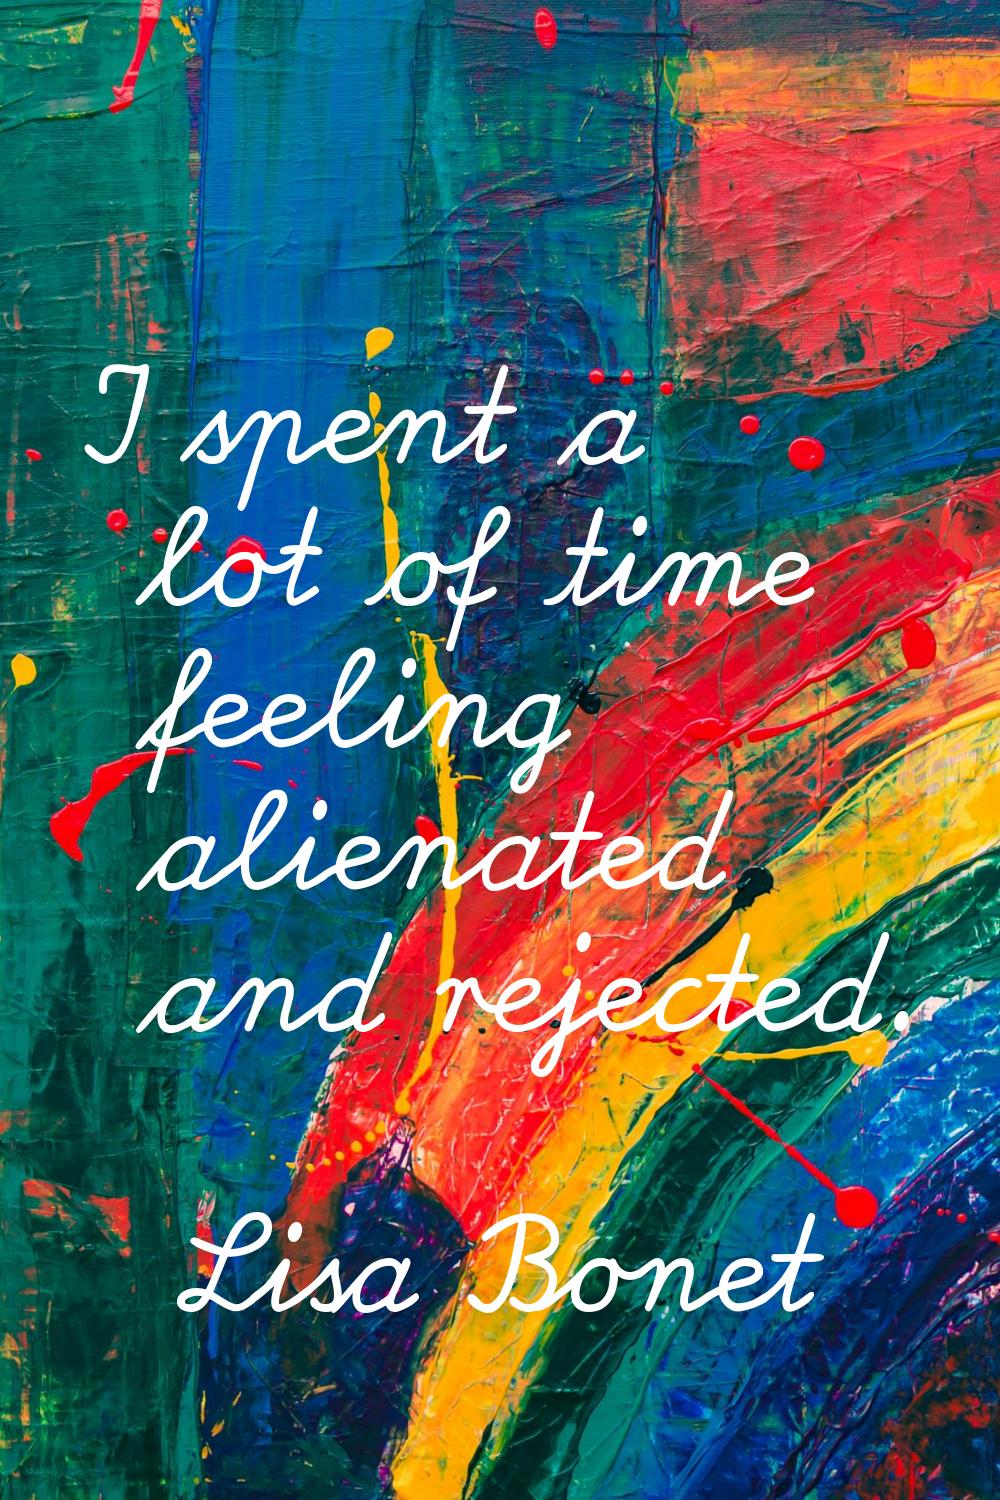 I spent a lot of time feeling alienated and rejected.